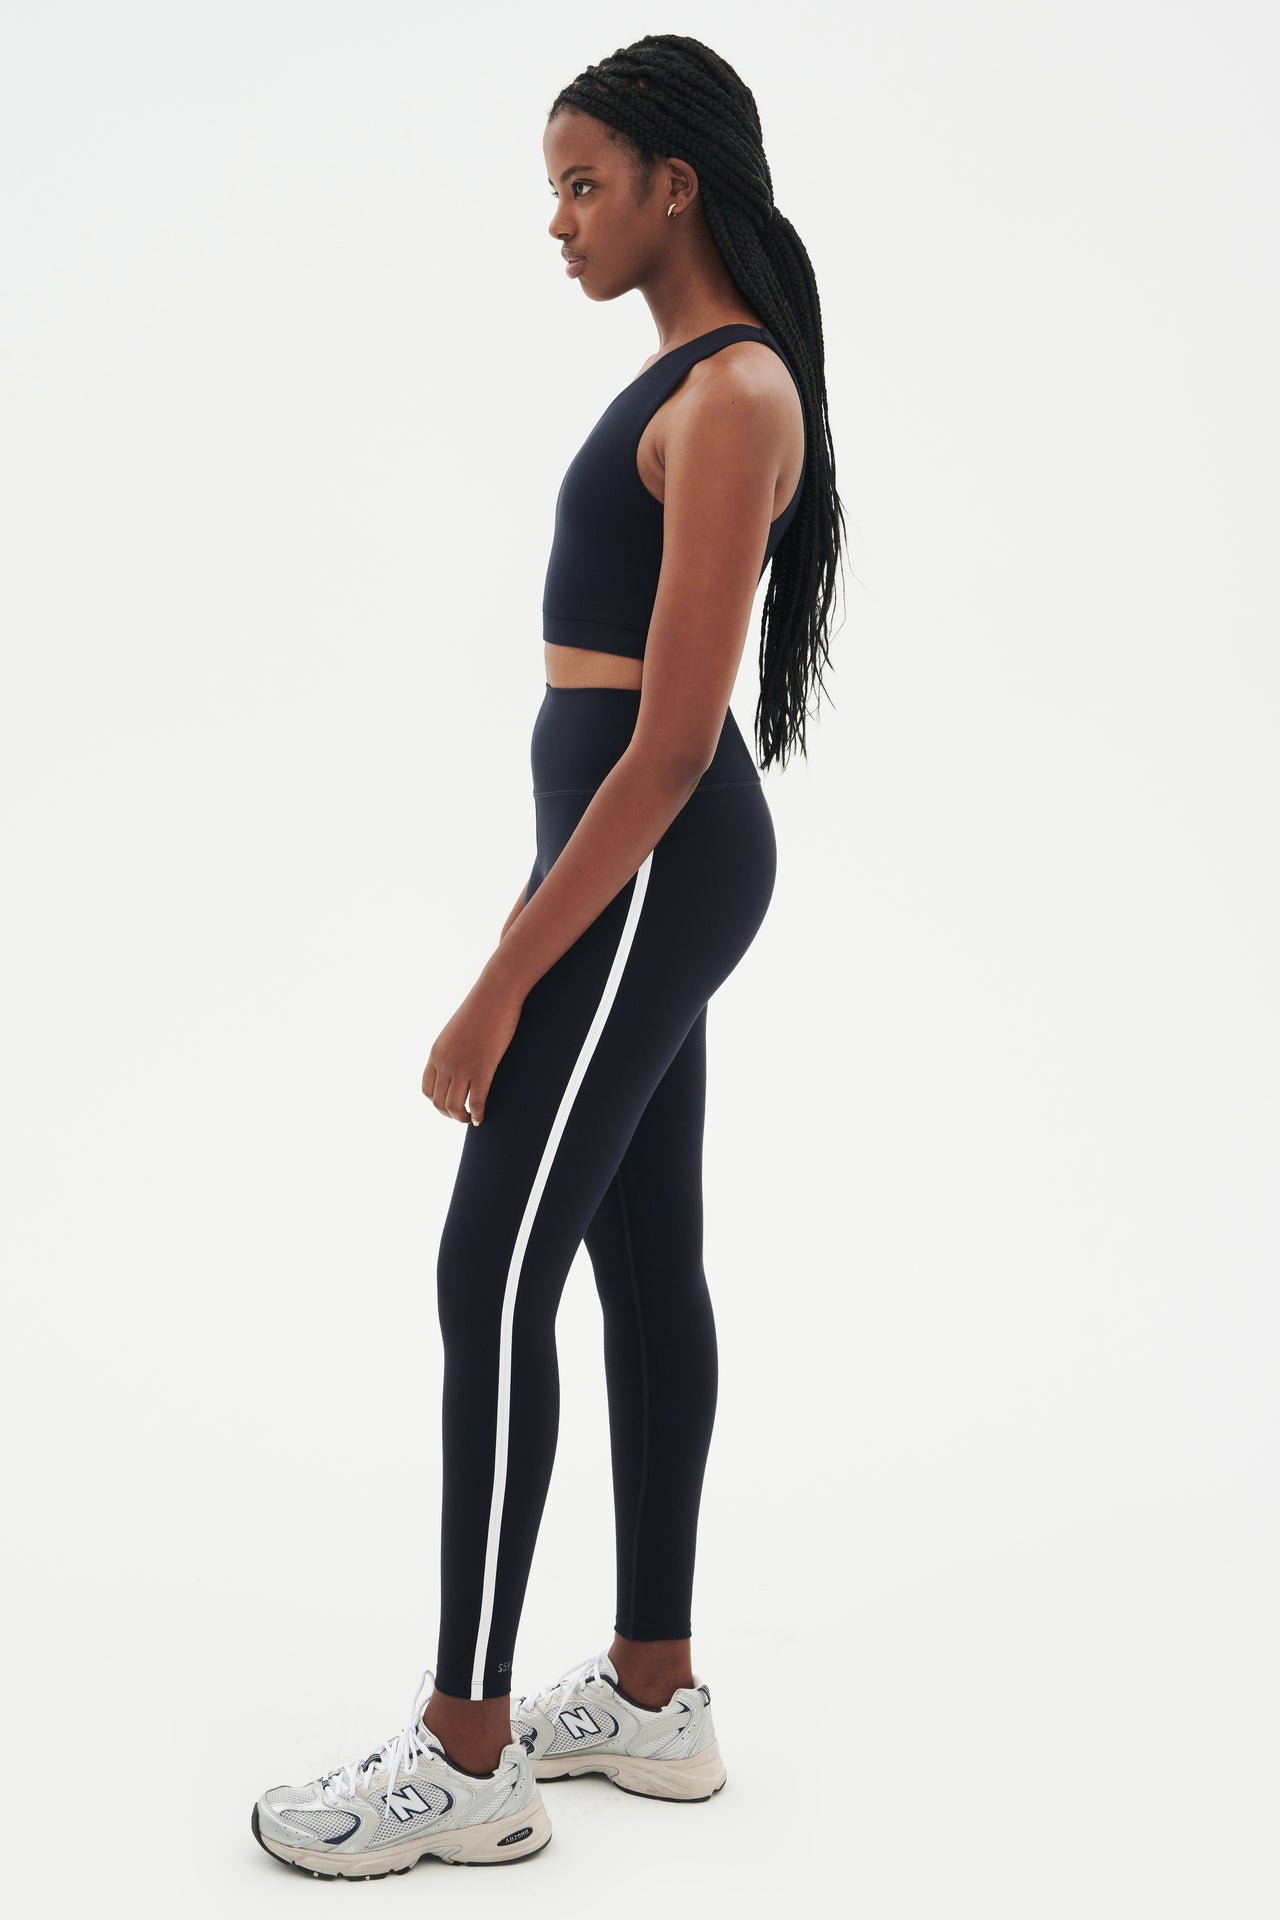 Full side view of girl wearing a dark blue one shoulder bra and a black leggings with a white stripe down the side and with grey shoes